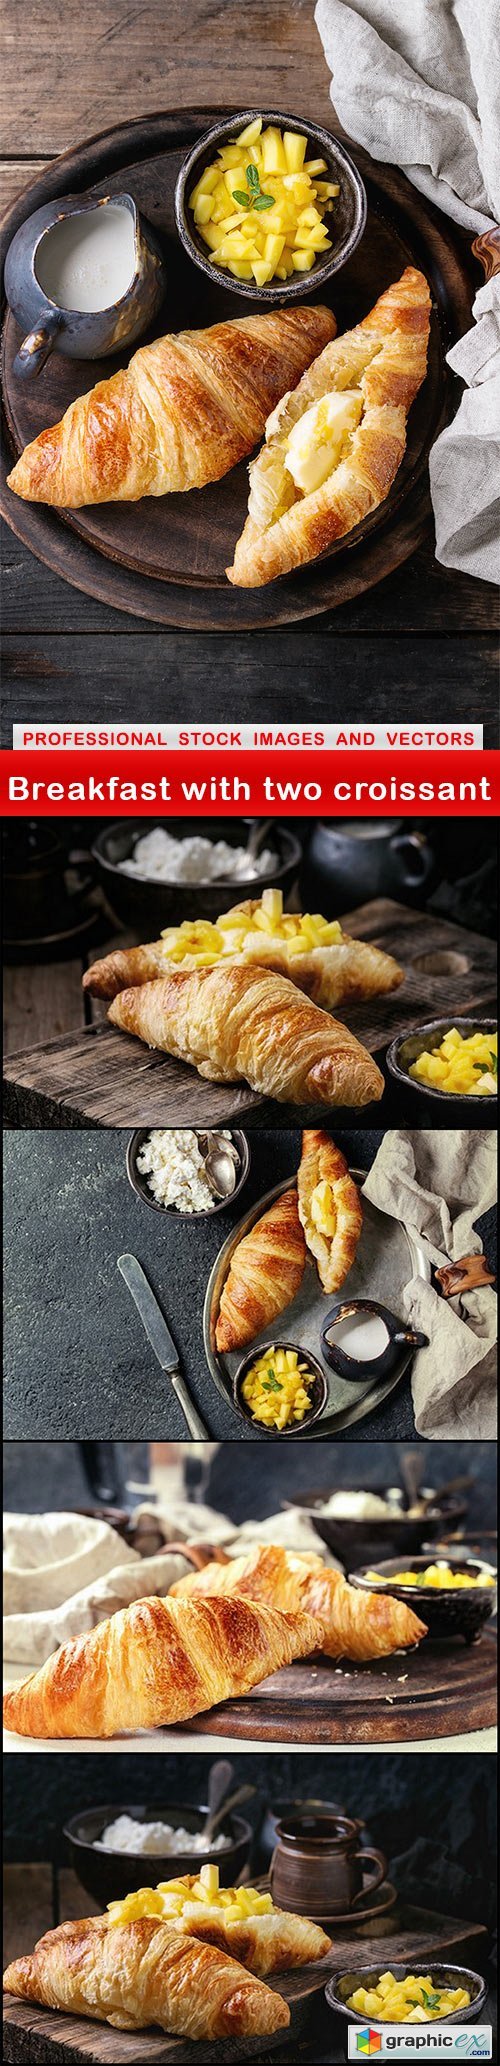 Breakfast with two croissant - 5 UHQ JPEG